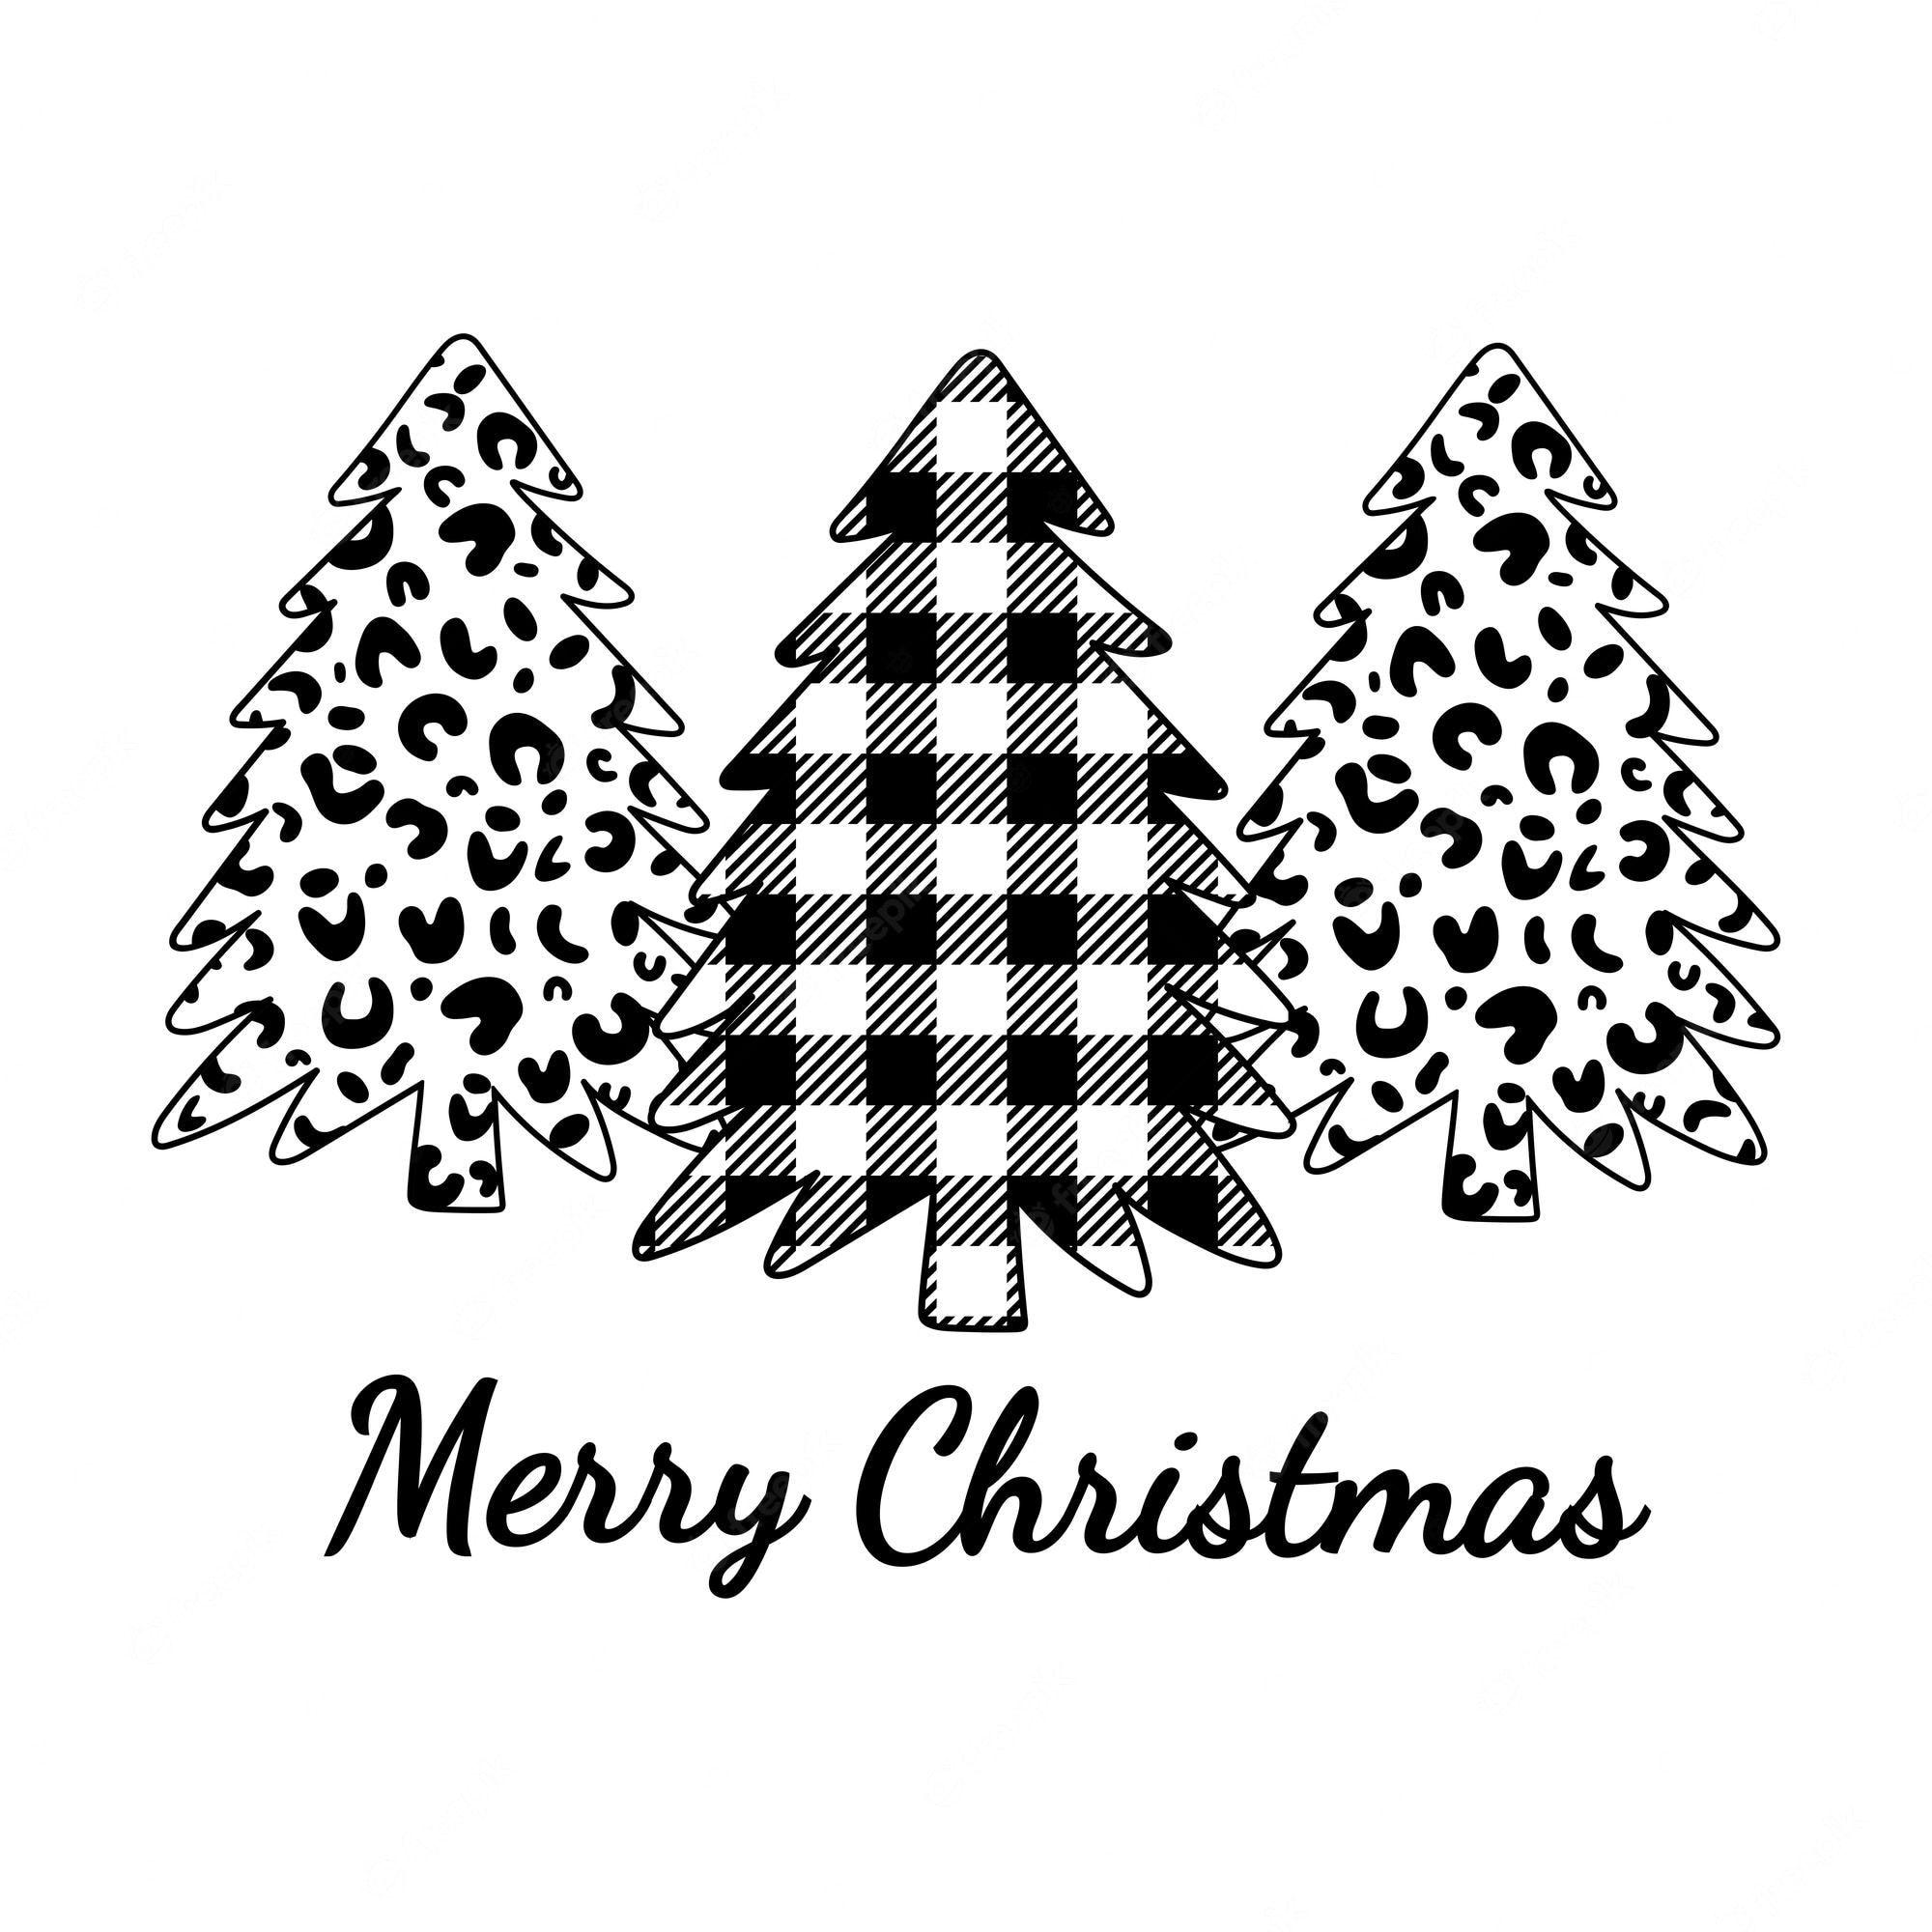 Premium Vector. Merry christmas leopard print and buffalo plaid ornament christmas trees winter forest